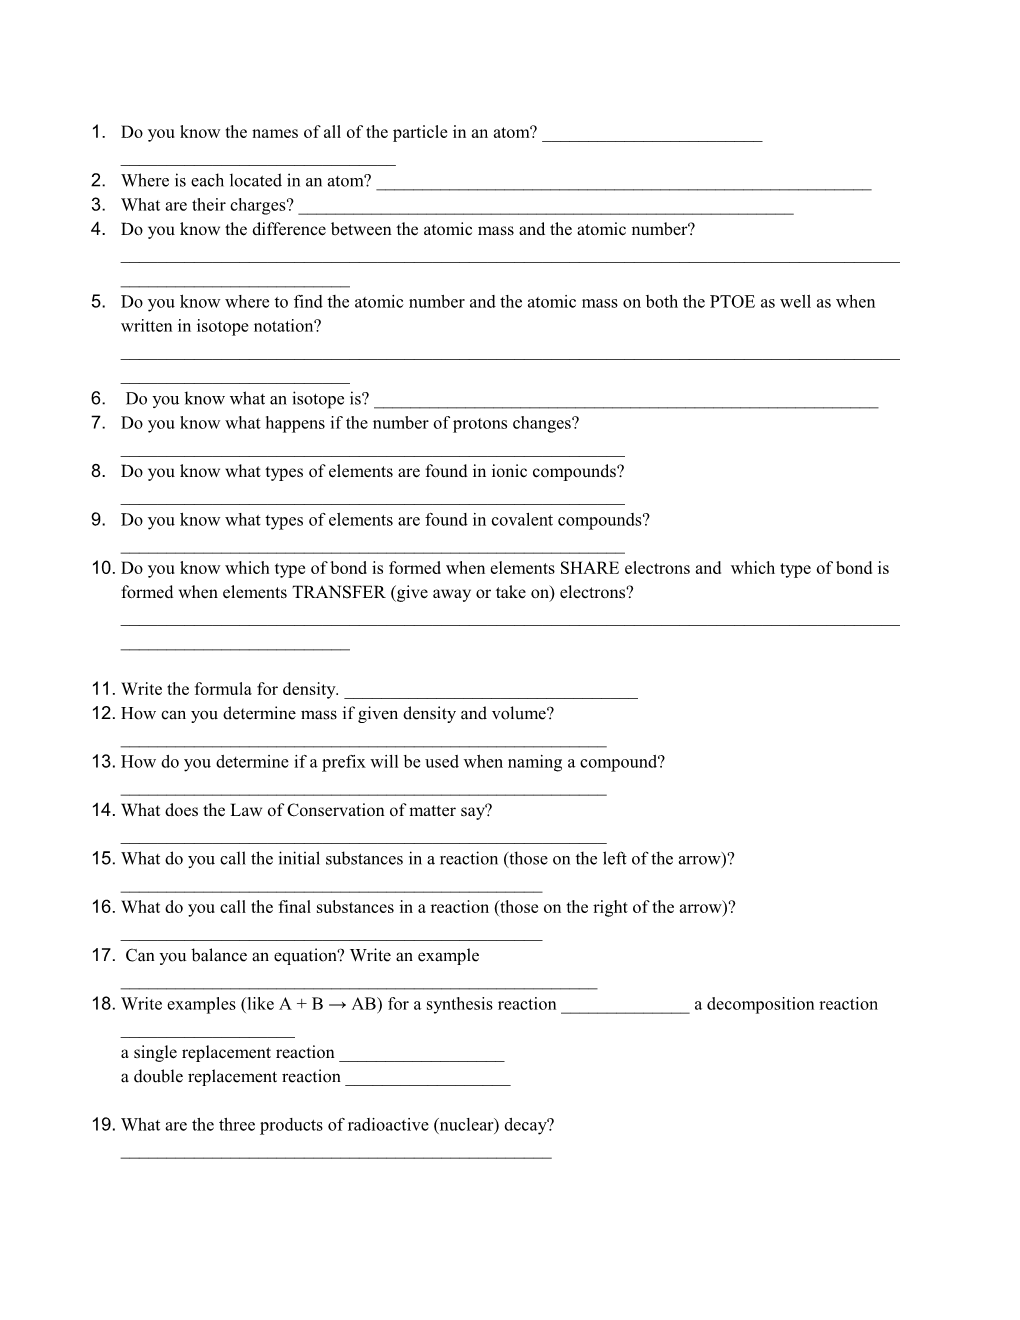 Rejmer First Semester Review Questions